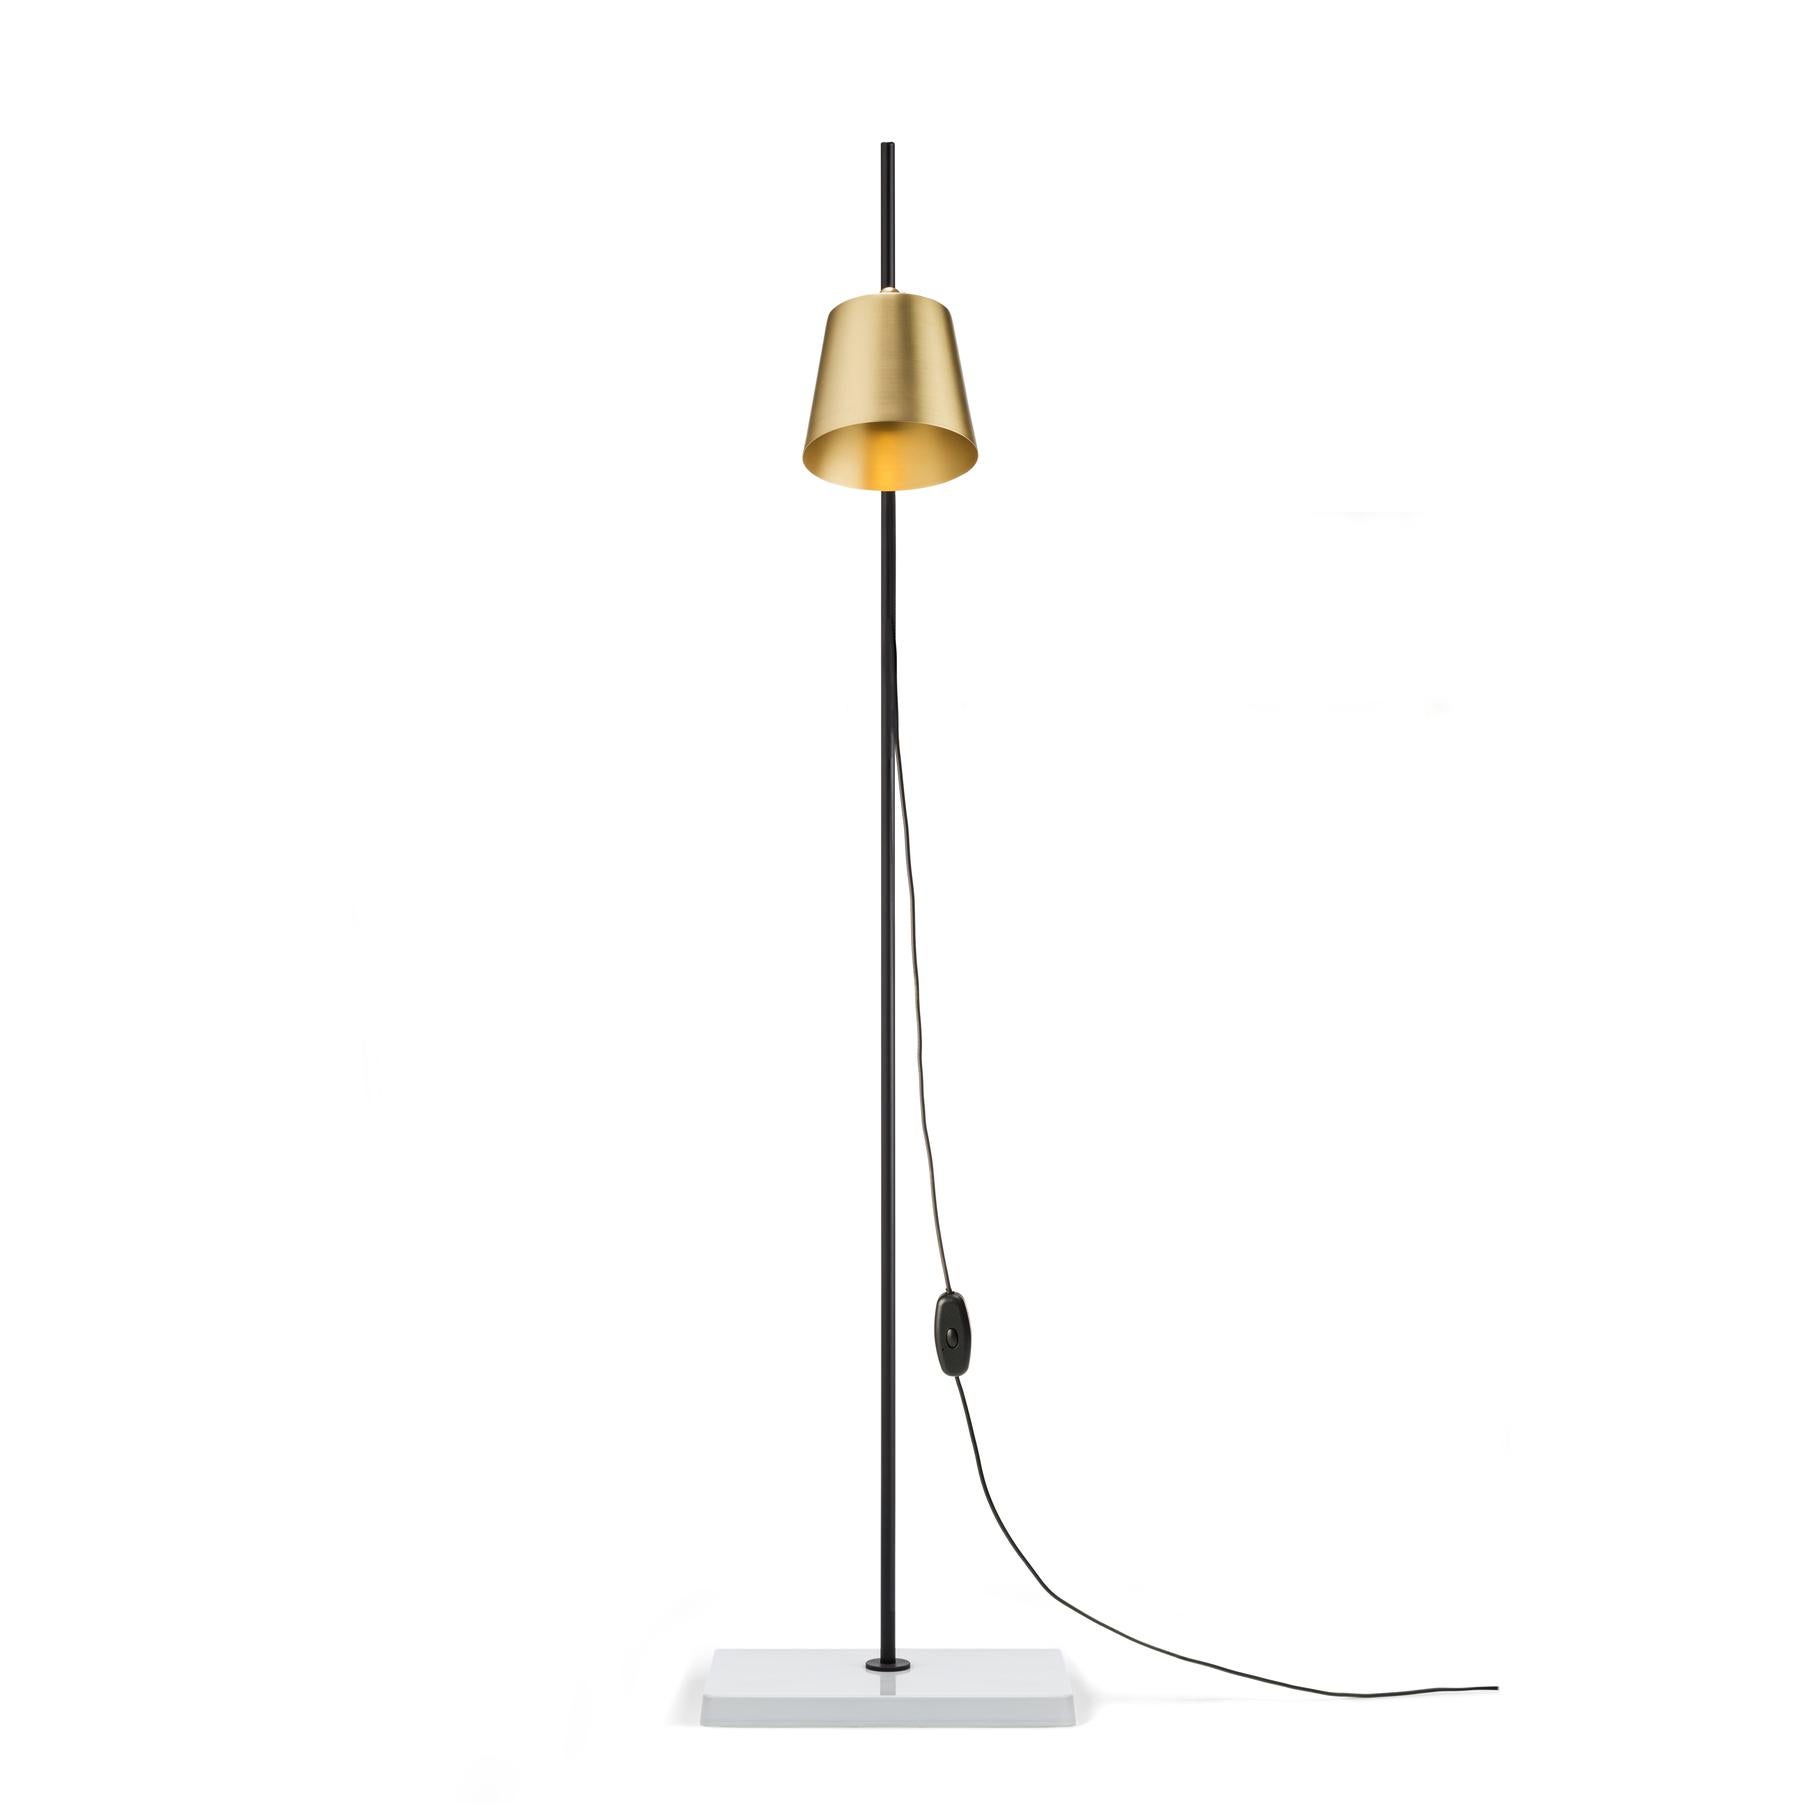 Floor lamp designed by Anatomy Design in 2010. 

The Lab Light design came about from a genuine fascination with laboratory equipment and with all those fantastic clamps and levers — the perfect place to start designing a multi-functional